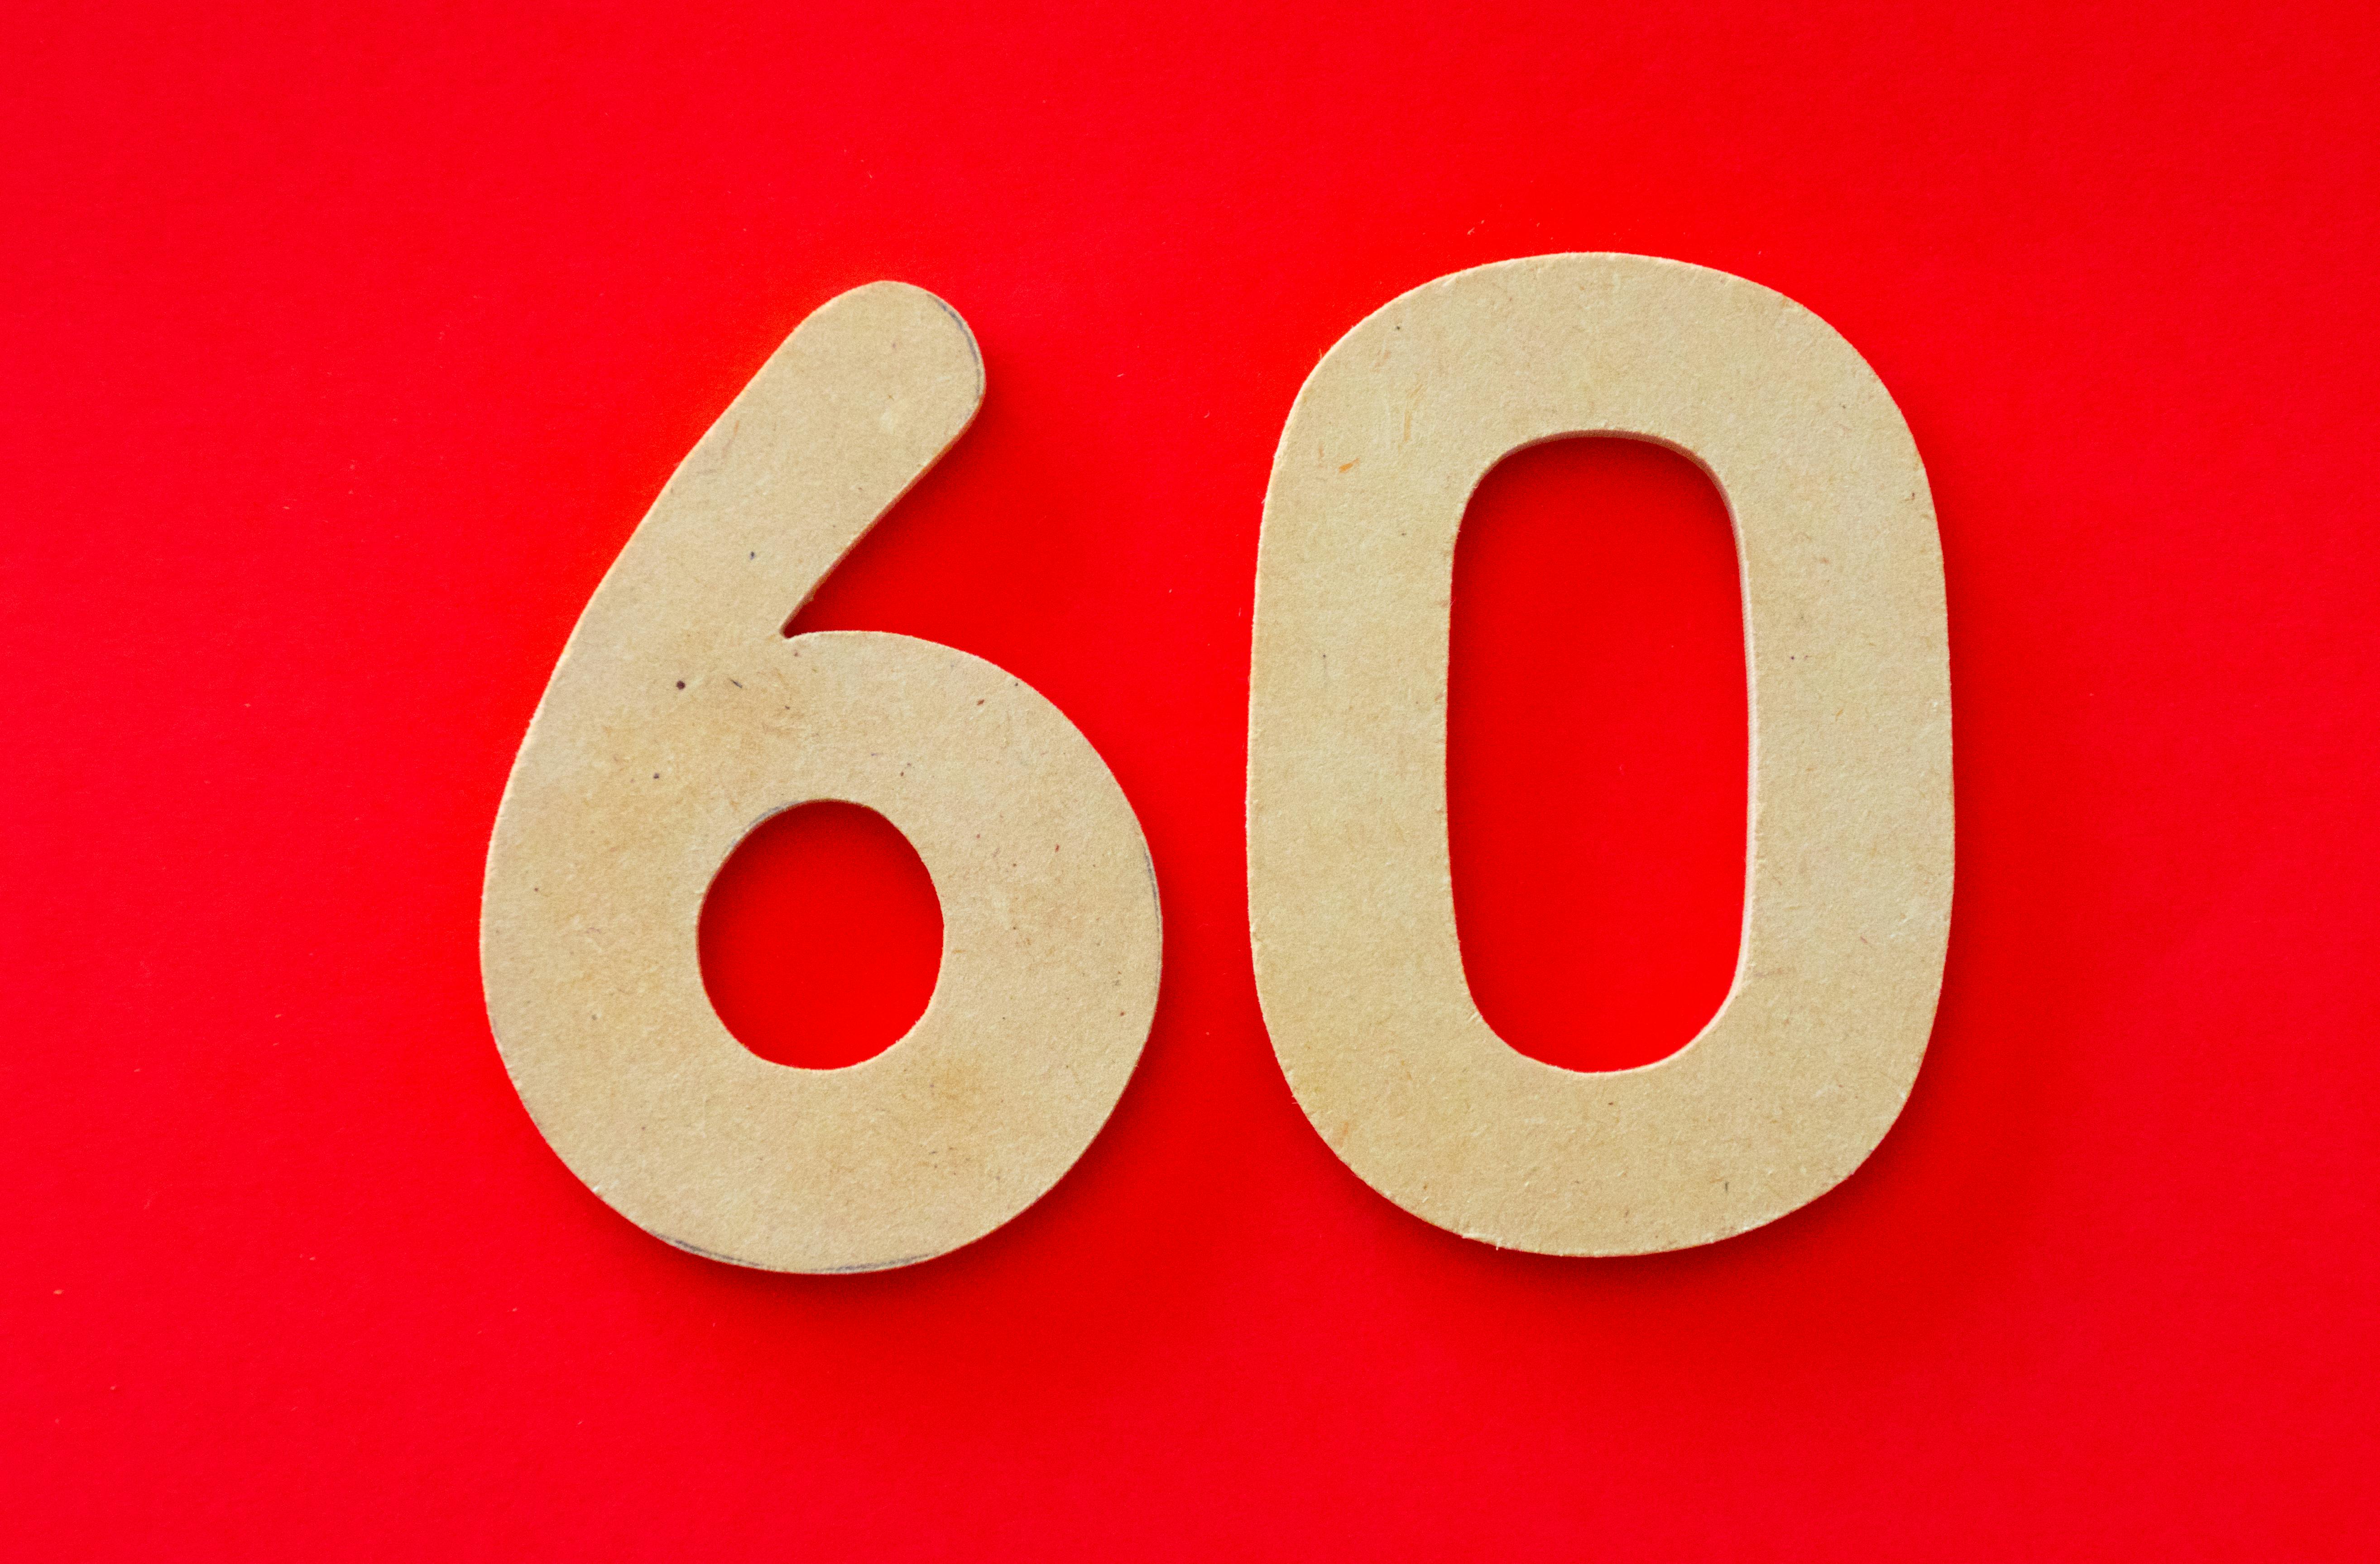 60 Number Free Stock Photo